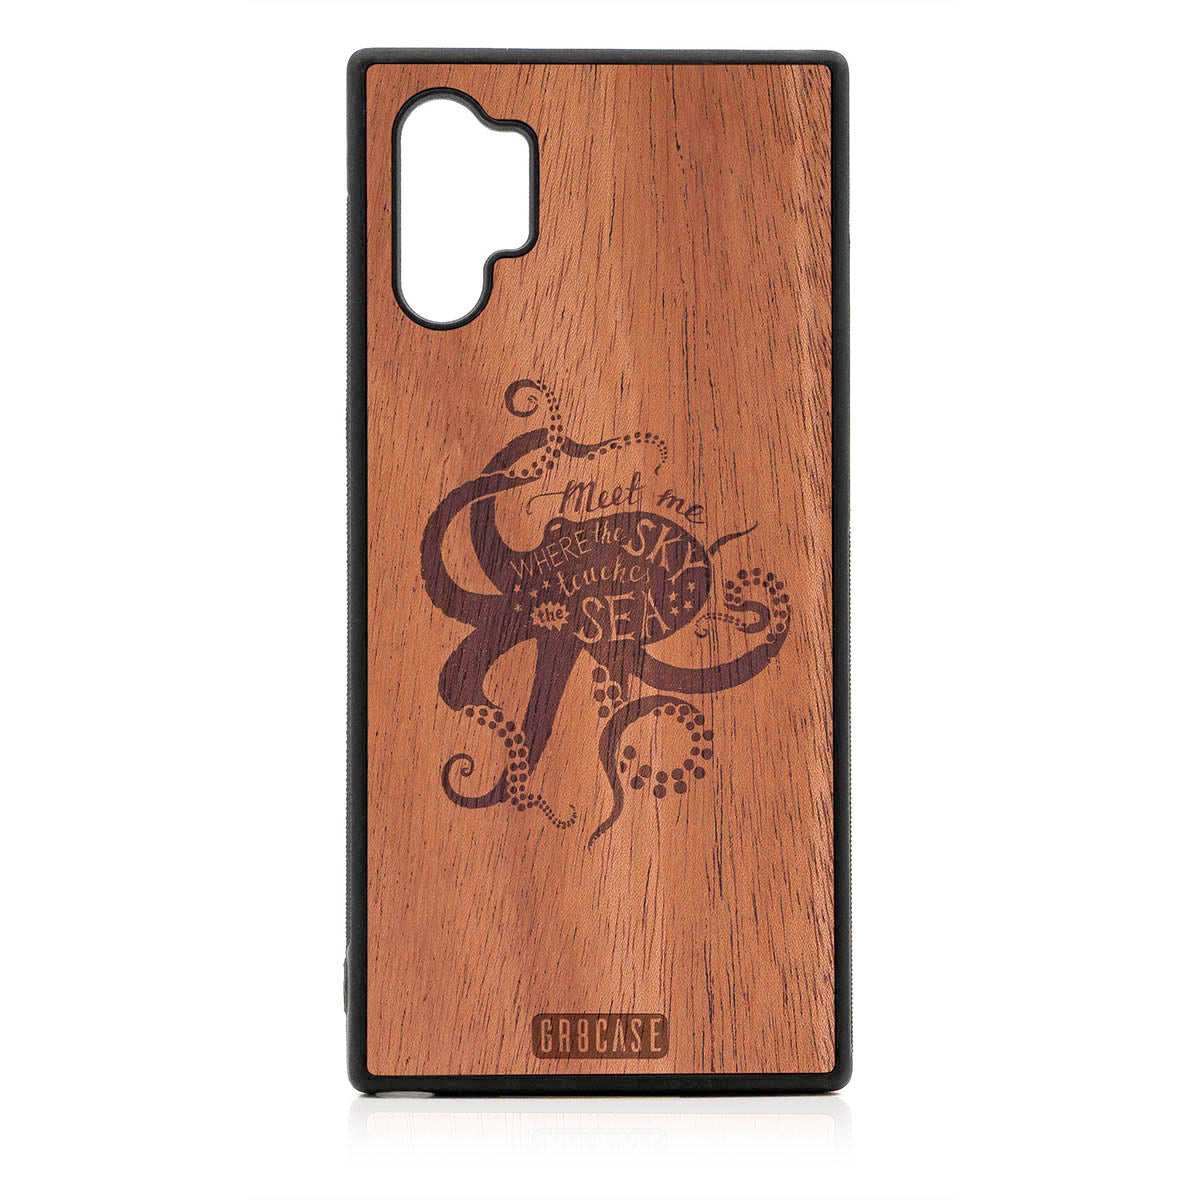 Meet Me Where The Sky Touches The Sea (Octopus) Design Wood Case For Samsung Galaxy Note 10 Plus